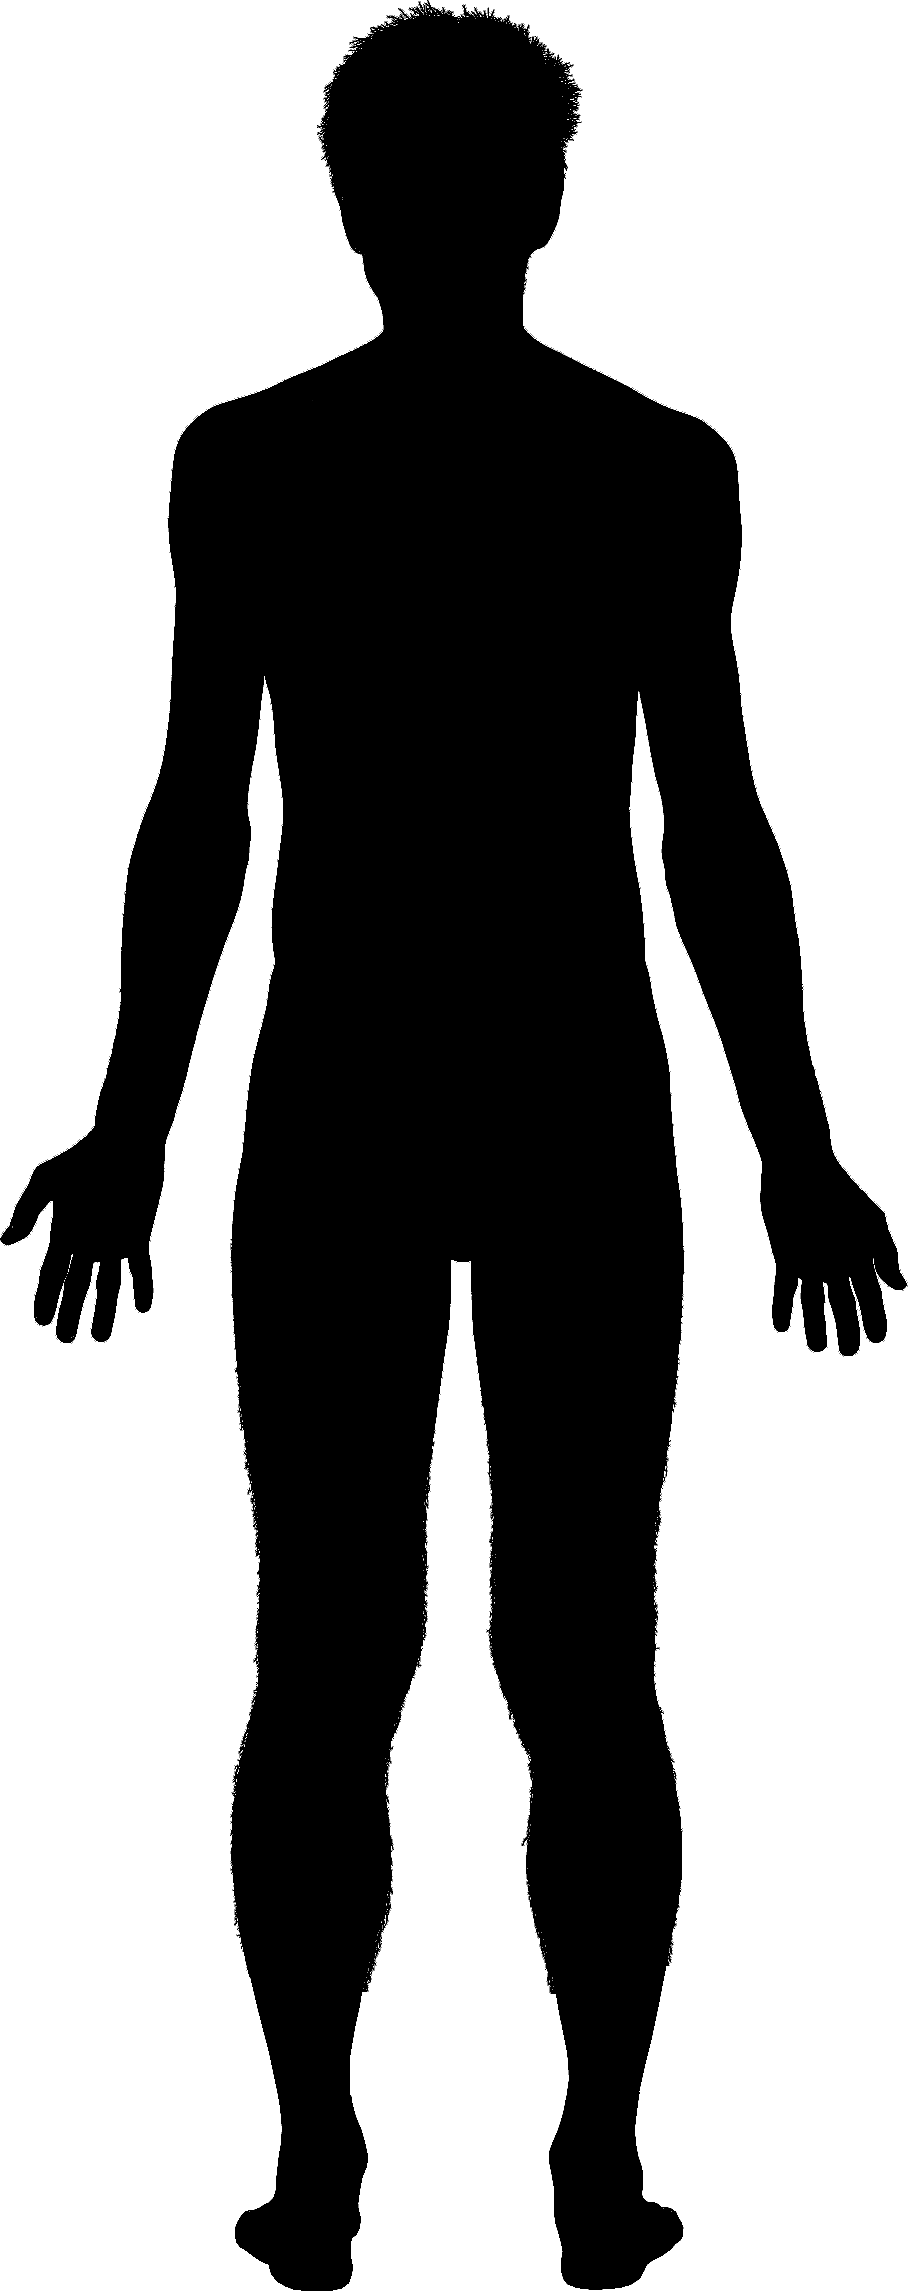 Human Body Silhouette Clipart 